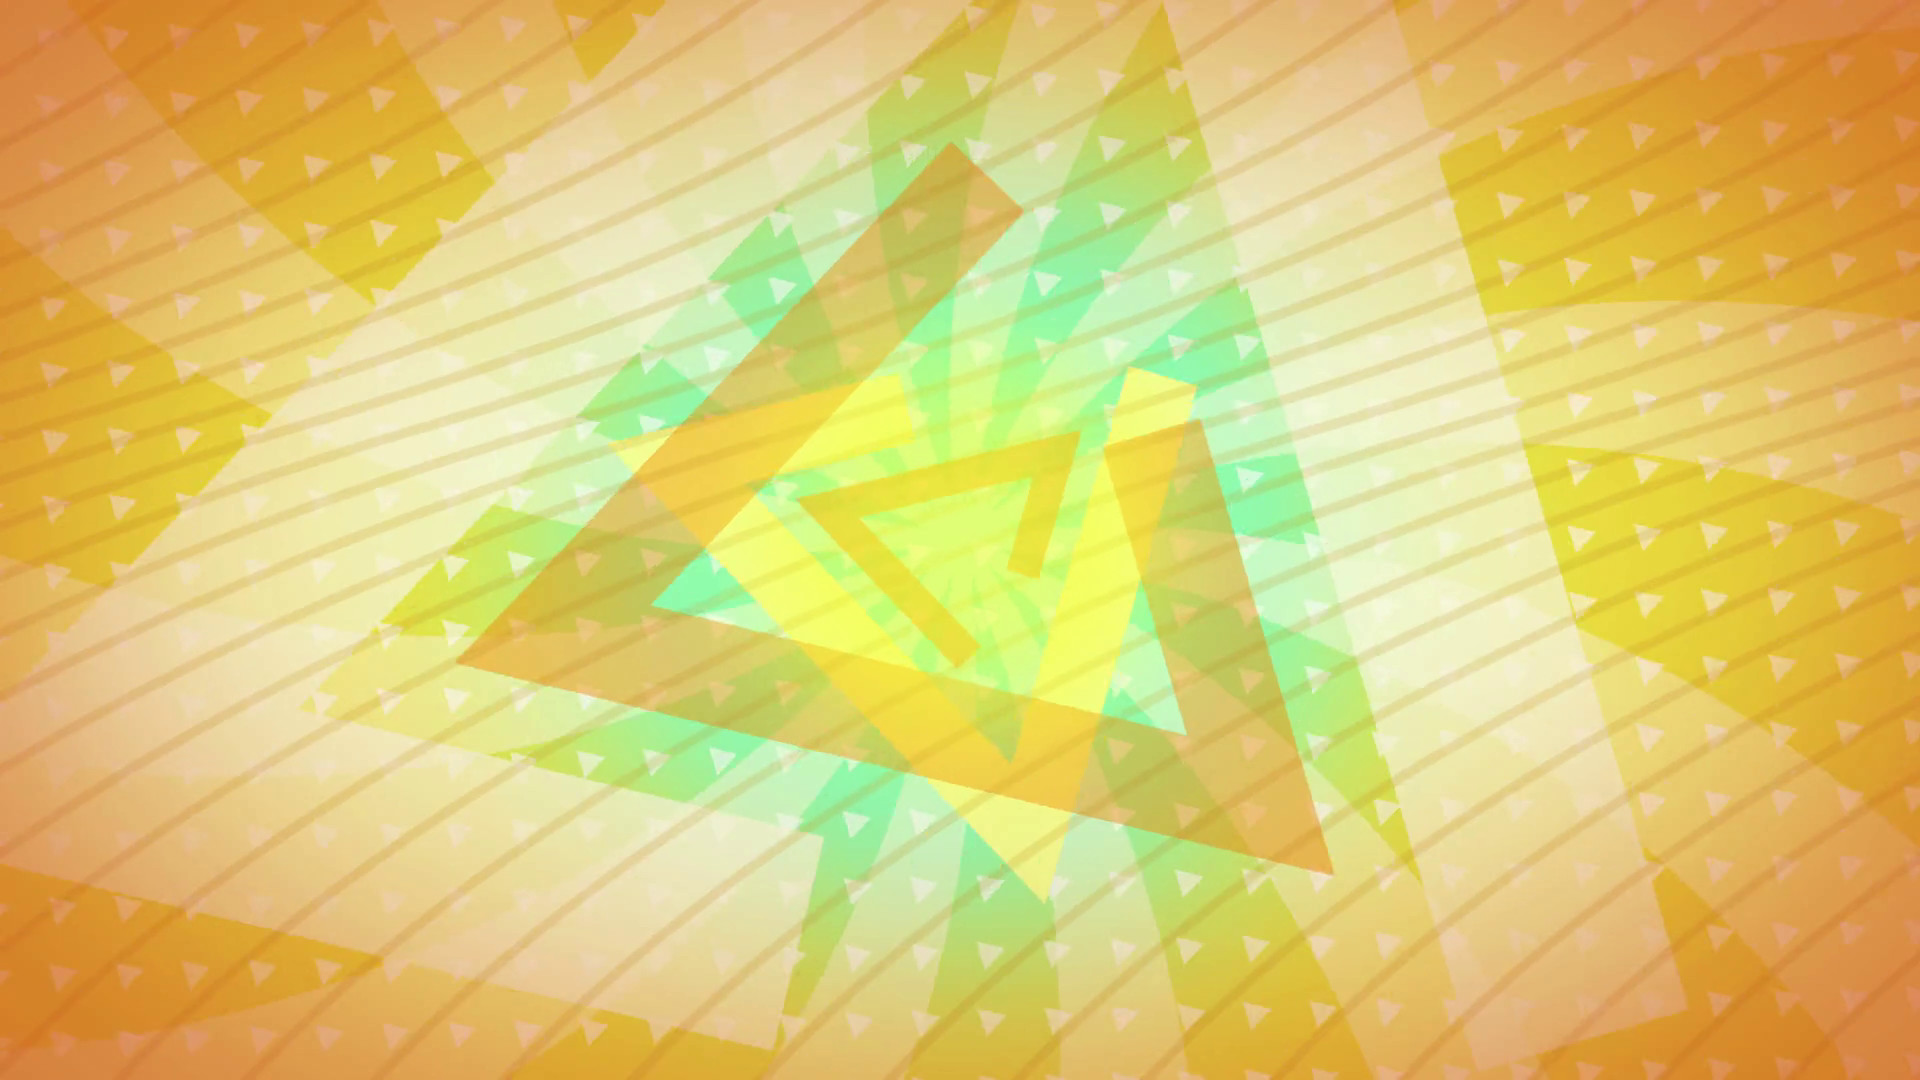 1920x1080 Subscription Library Yellow triangles Abstract Background Animation loop  for your logo or text. Technology Background. Futuristic